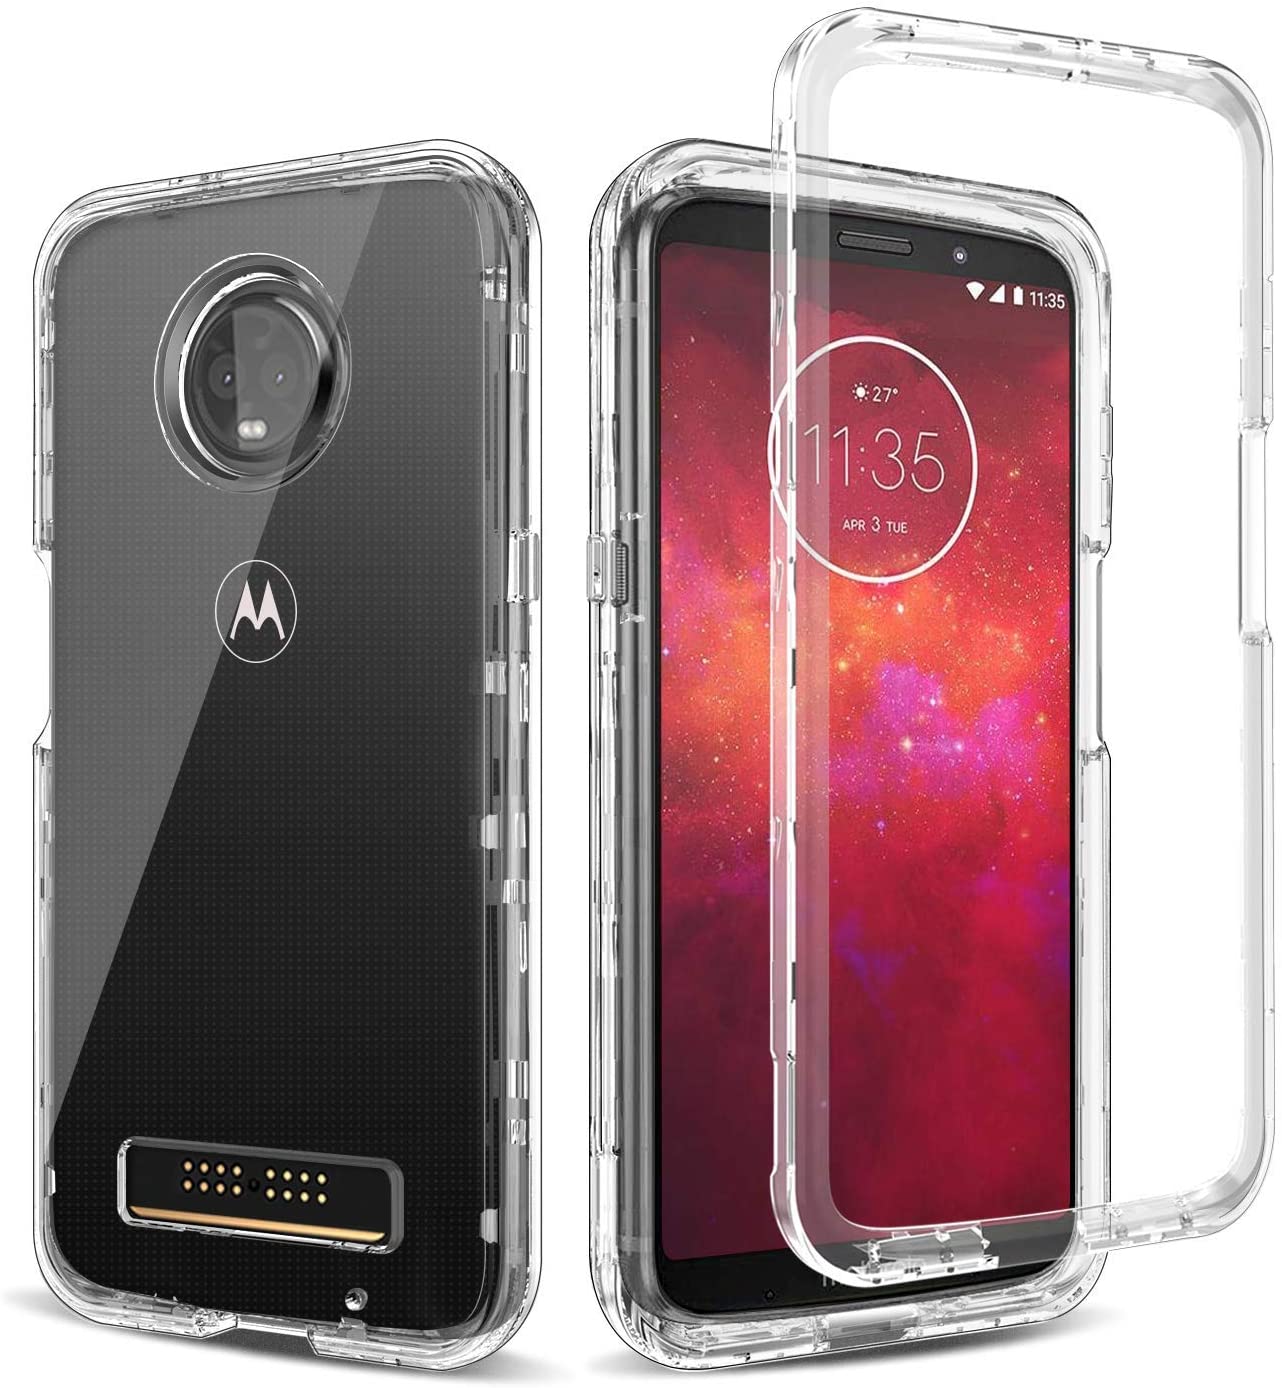 Crysrtal Clear Transparent 3 in 1 Heavy Duty Full Body Shockproof Protective Phone Cases for Motorola Moto Z3 Play